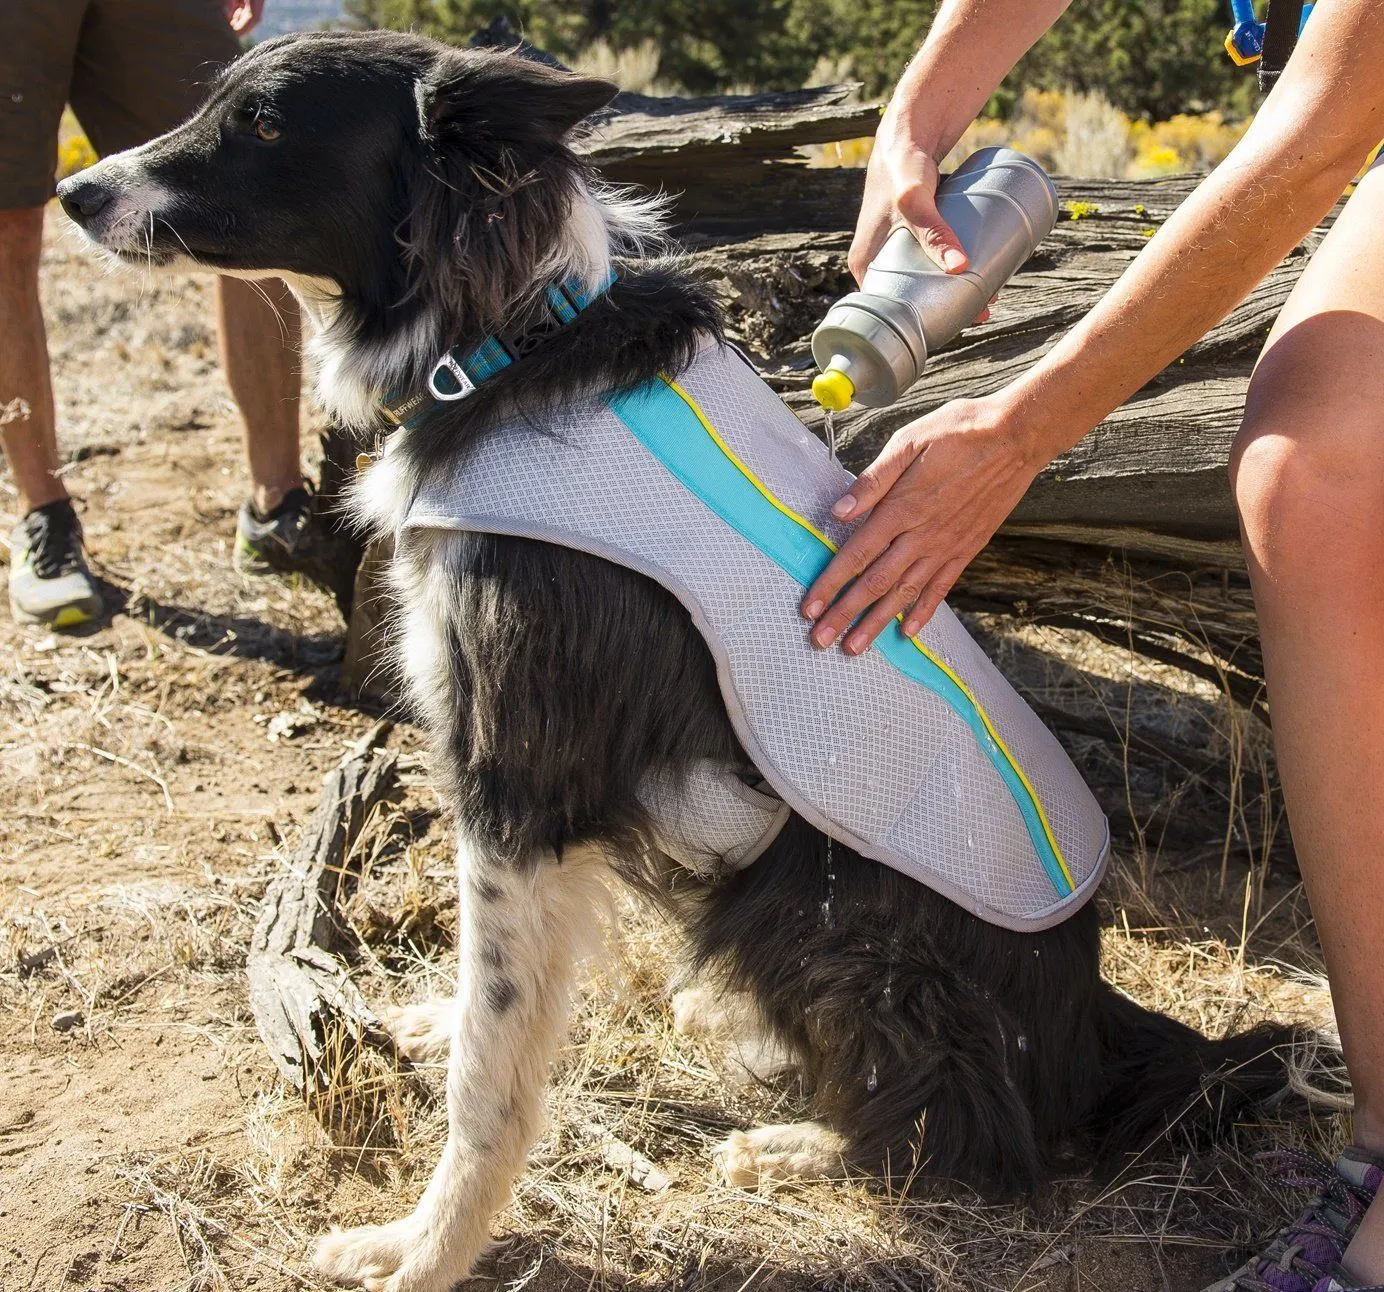 Dog in cooling jacket being sprayed down with water bottle on hike